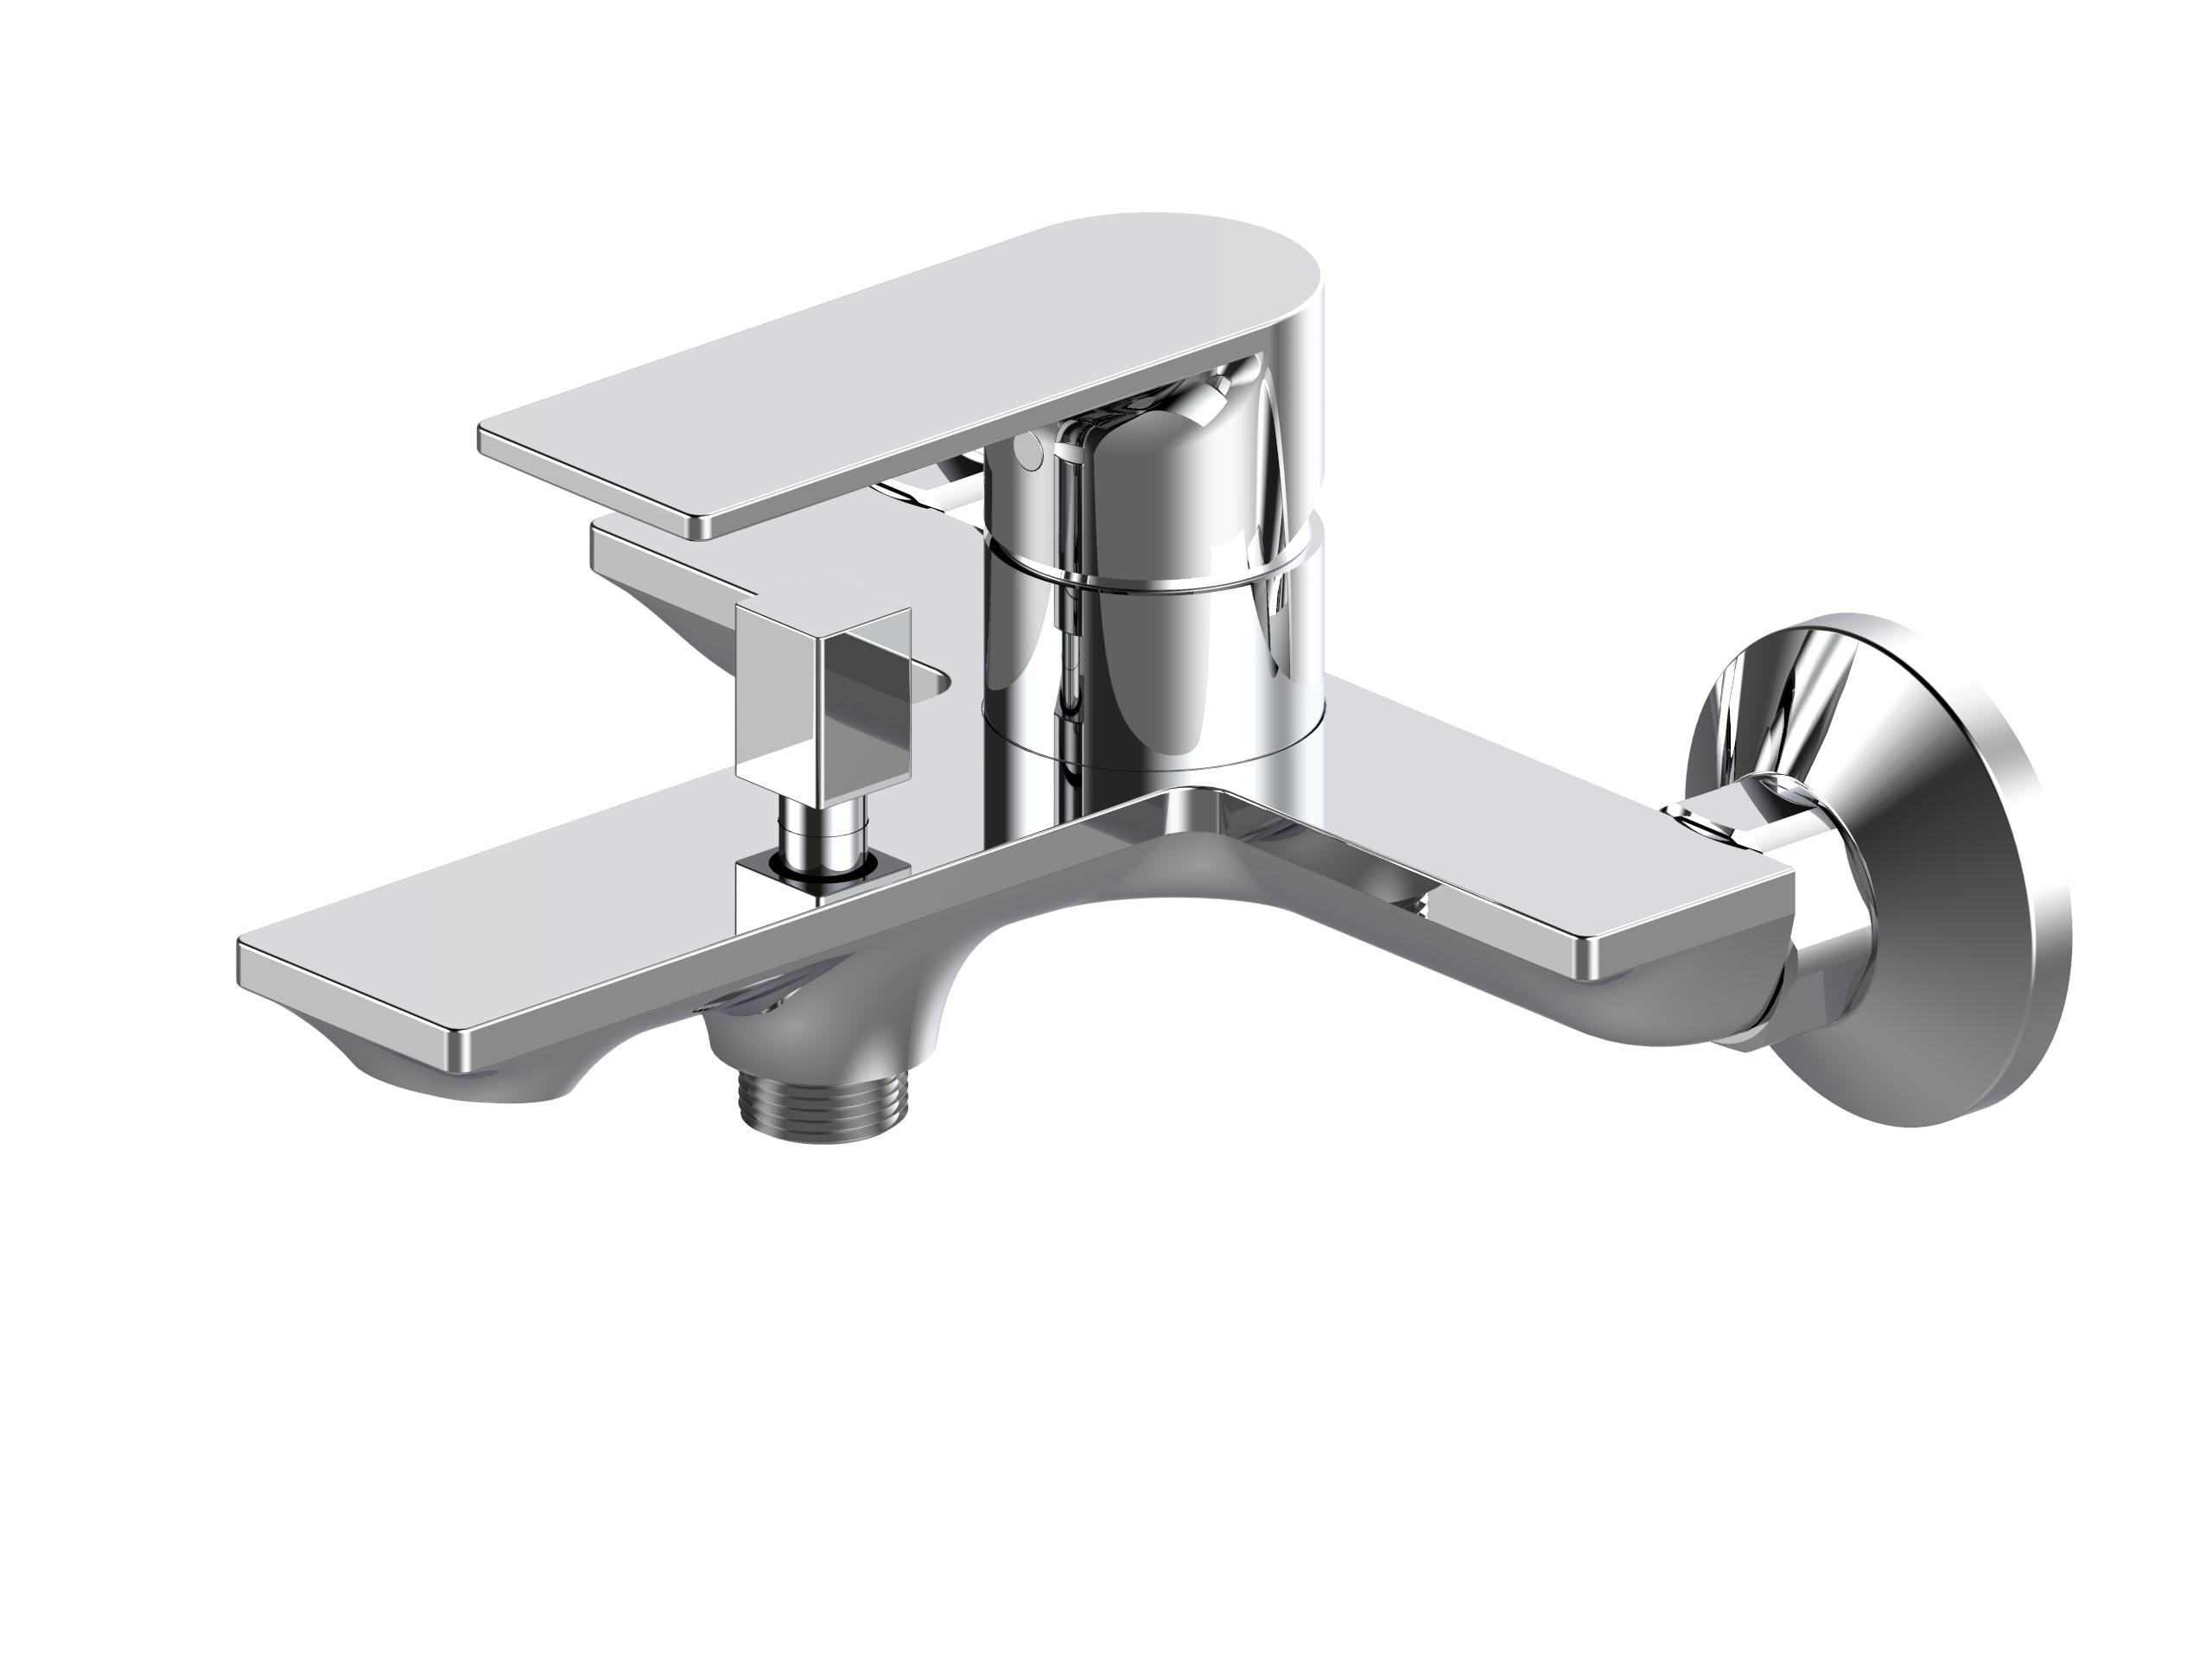 What are the common problems with brass basin faucets and how to troubleshoot them?